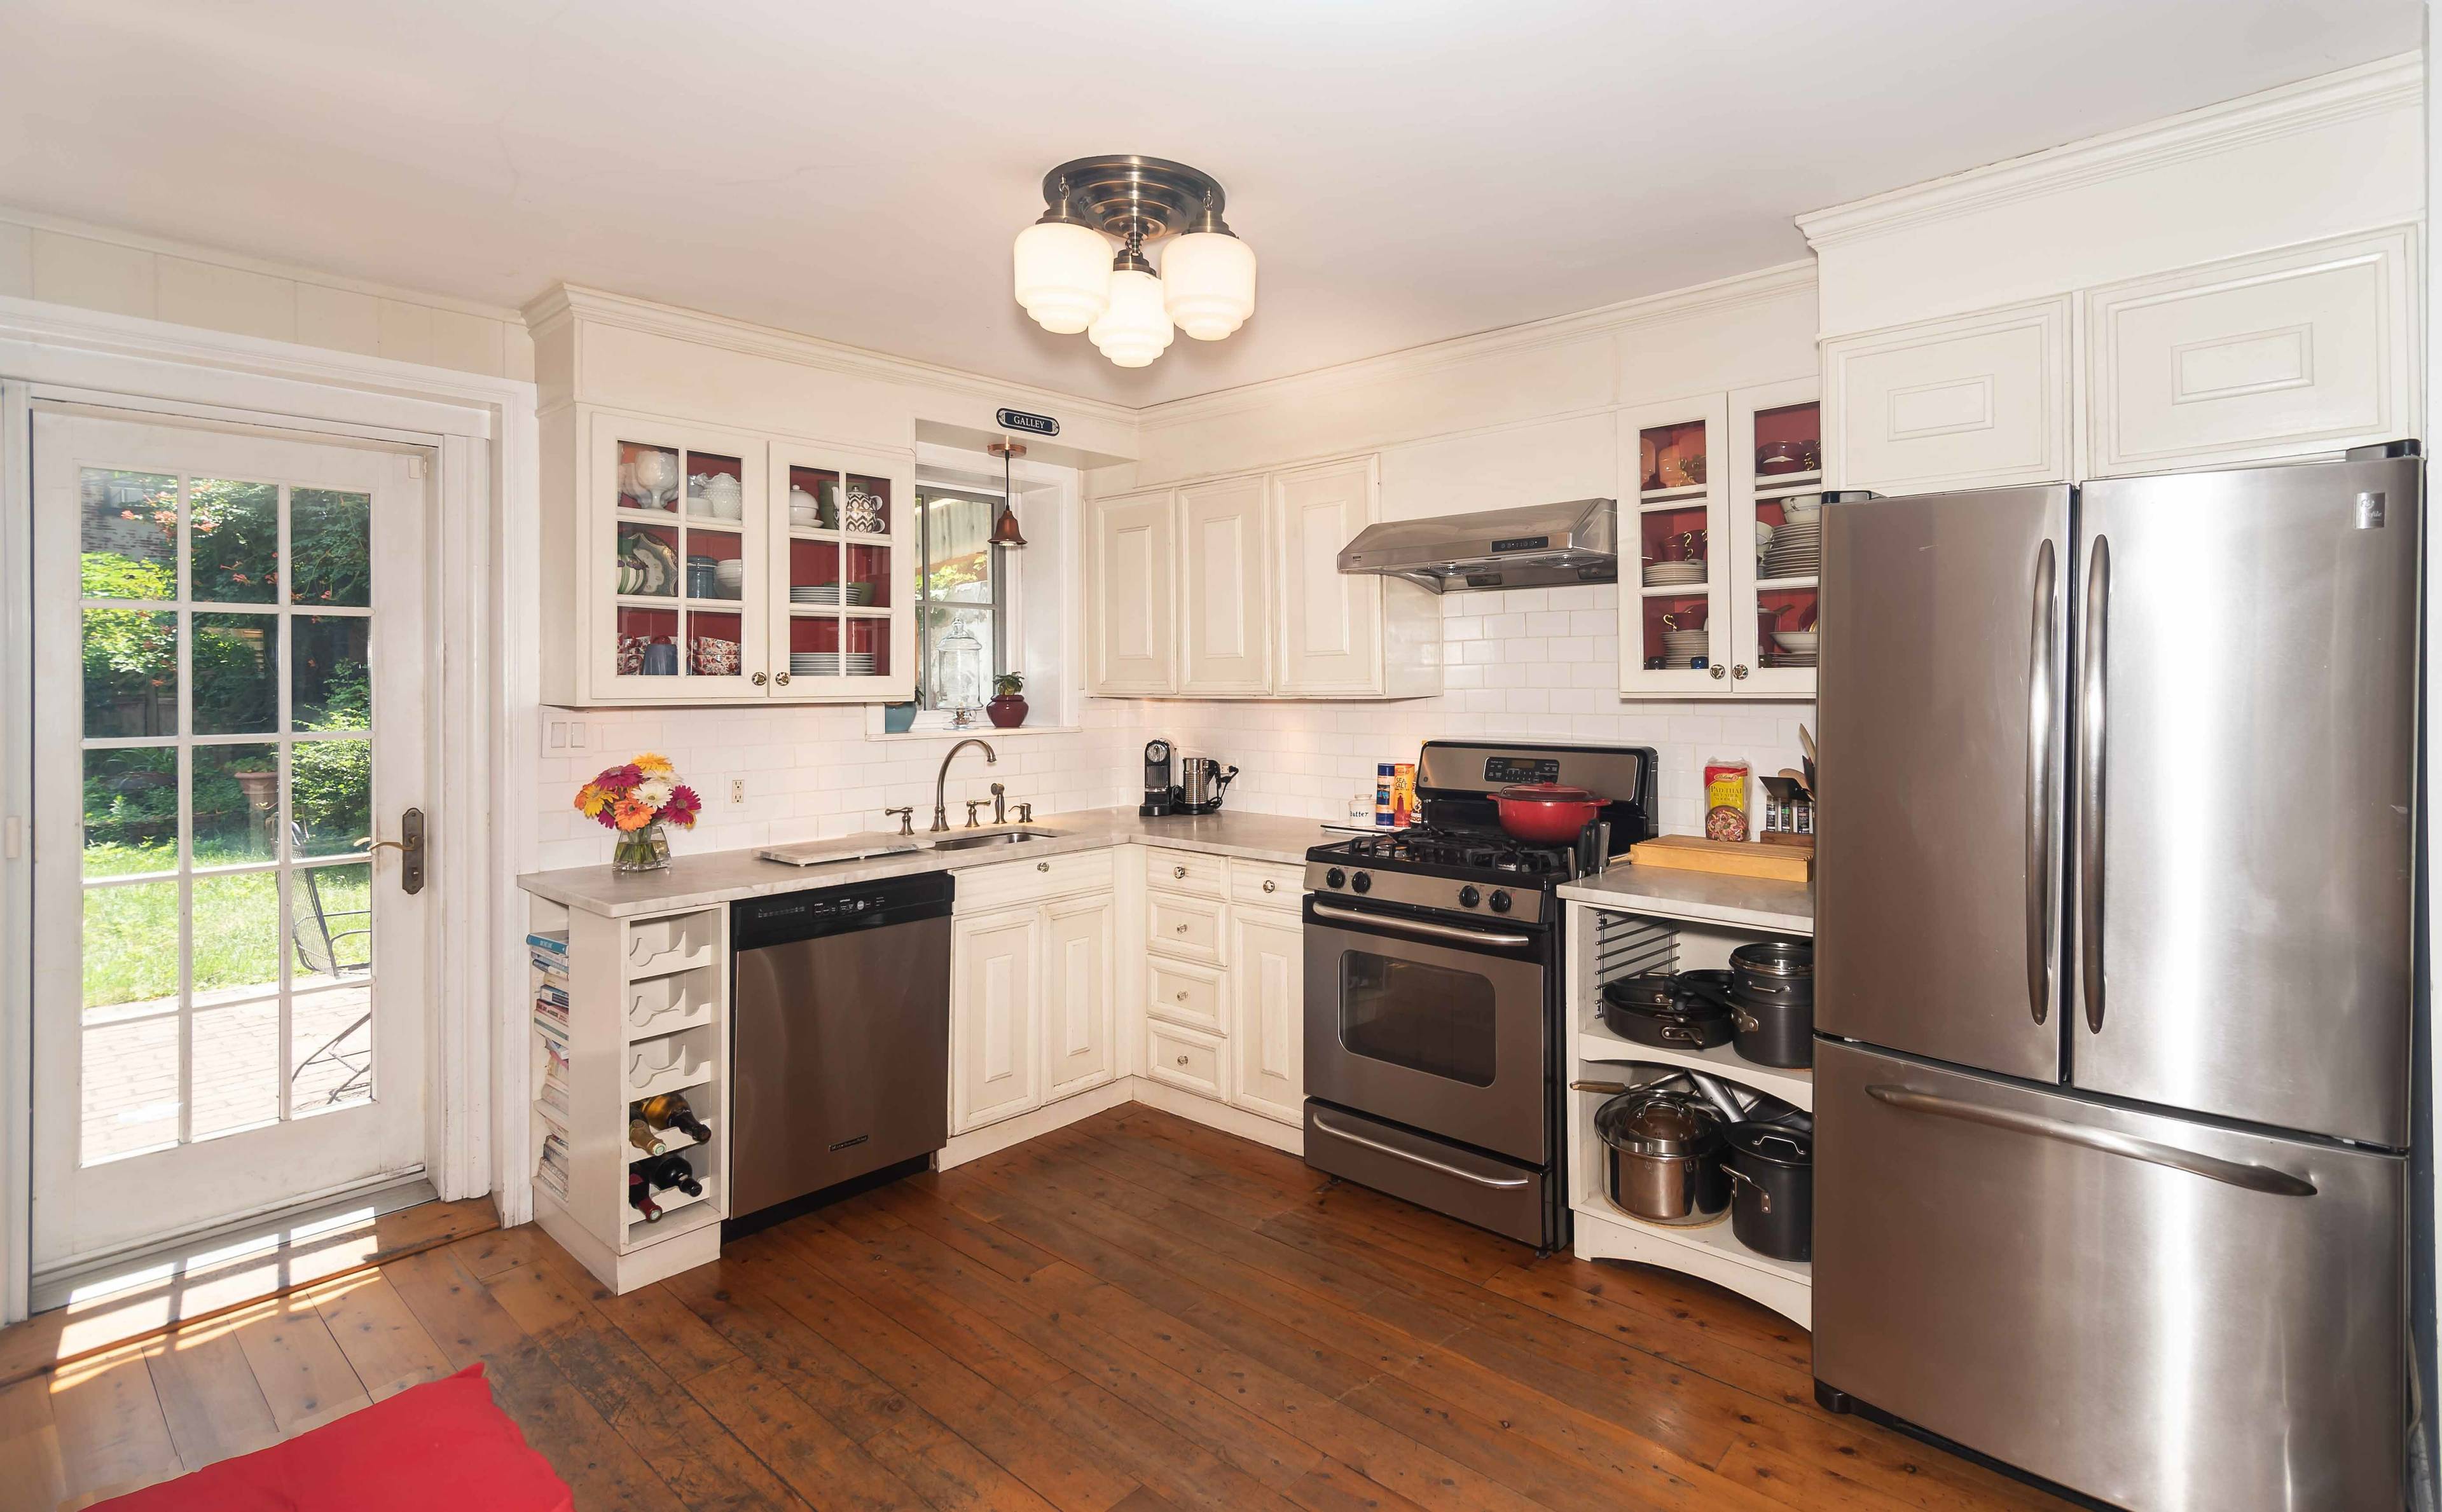 1, 900 sq ft OWNER TRIPLEX a Truly a beautiful, well maintained home located on a coveted prime Carroll Gardens block.